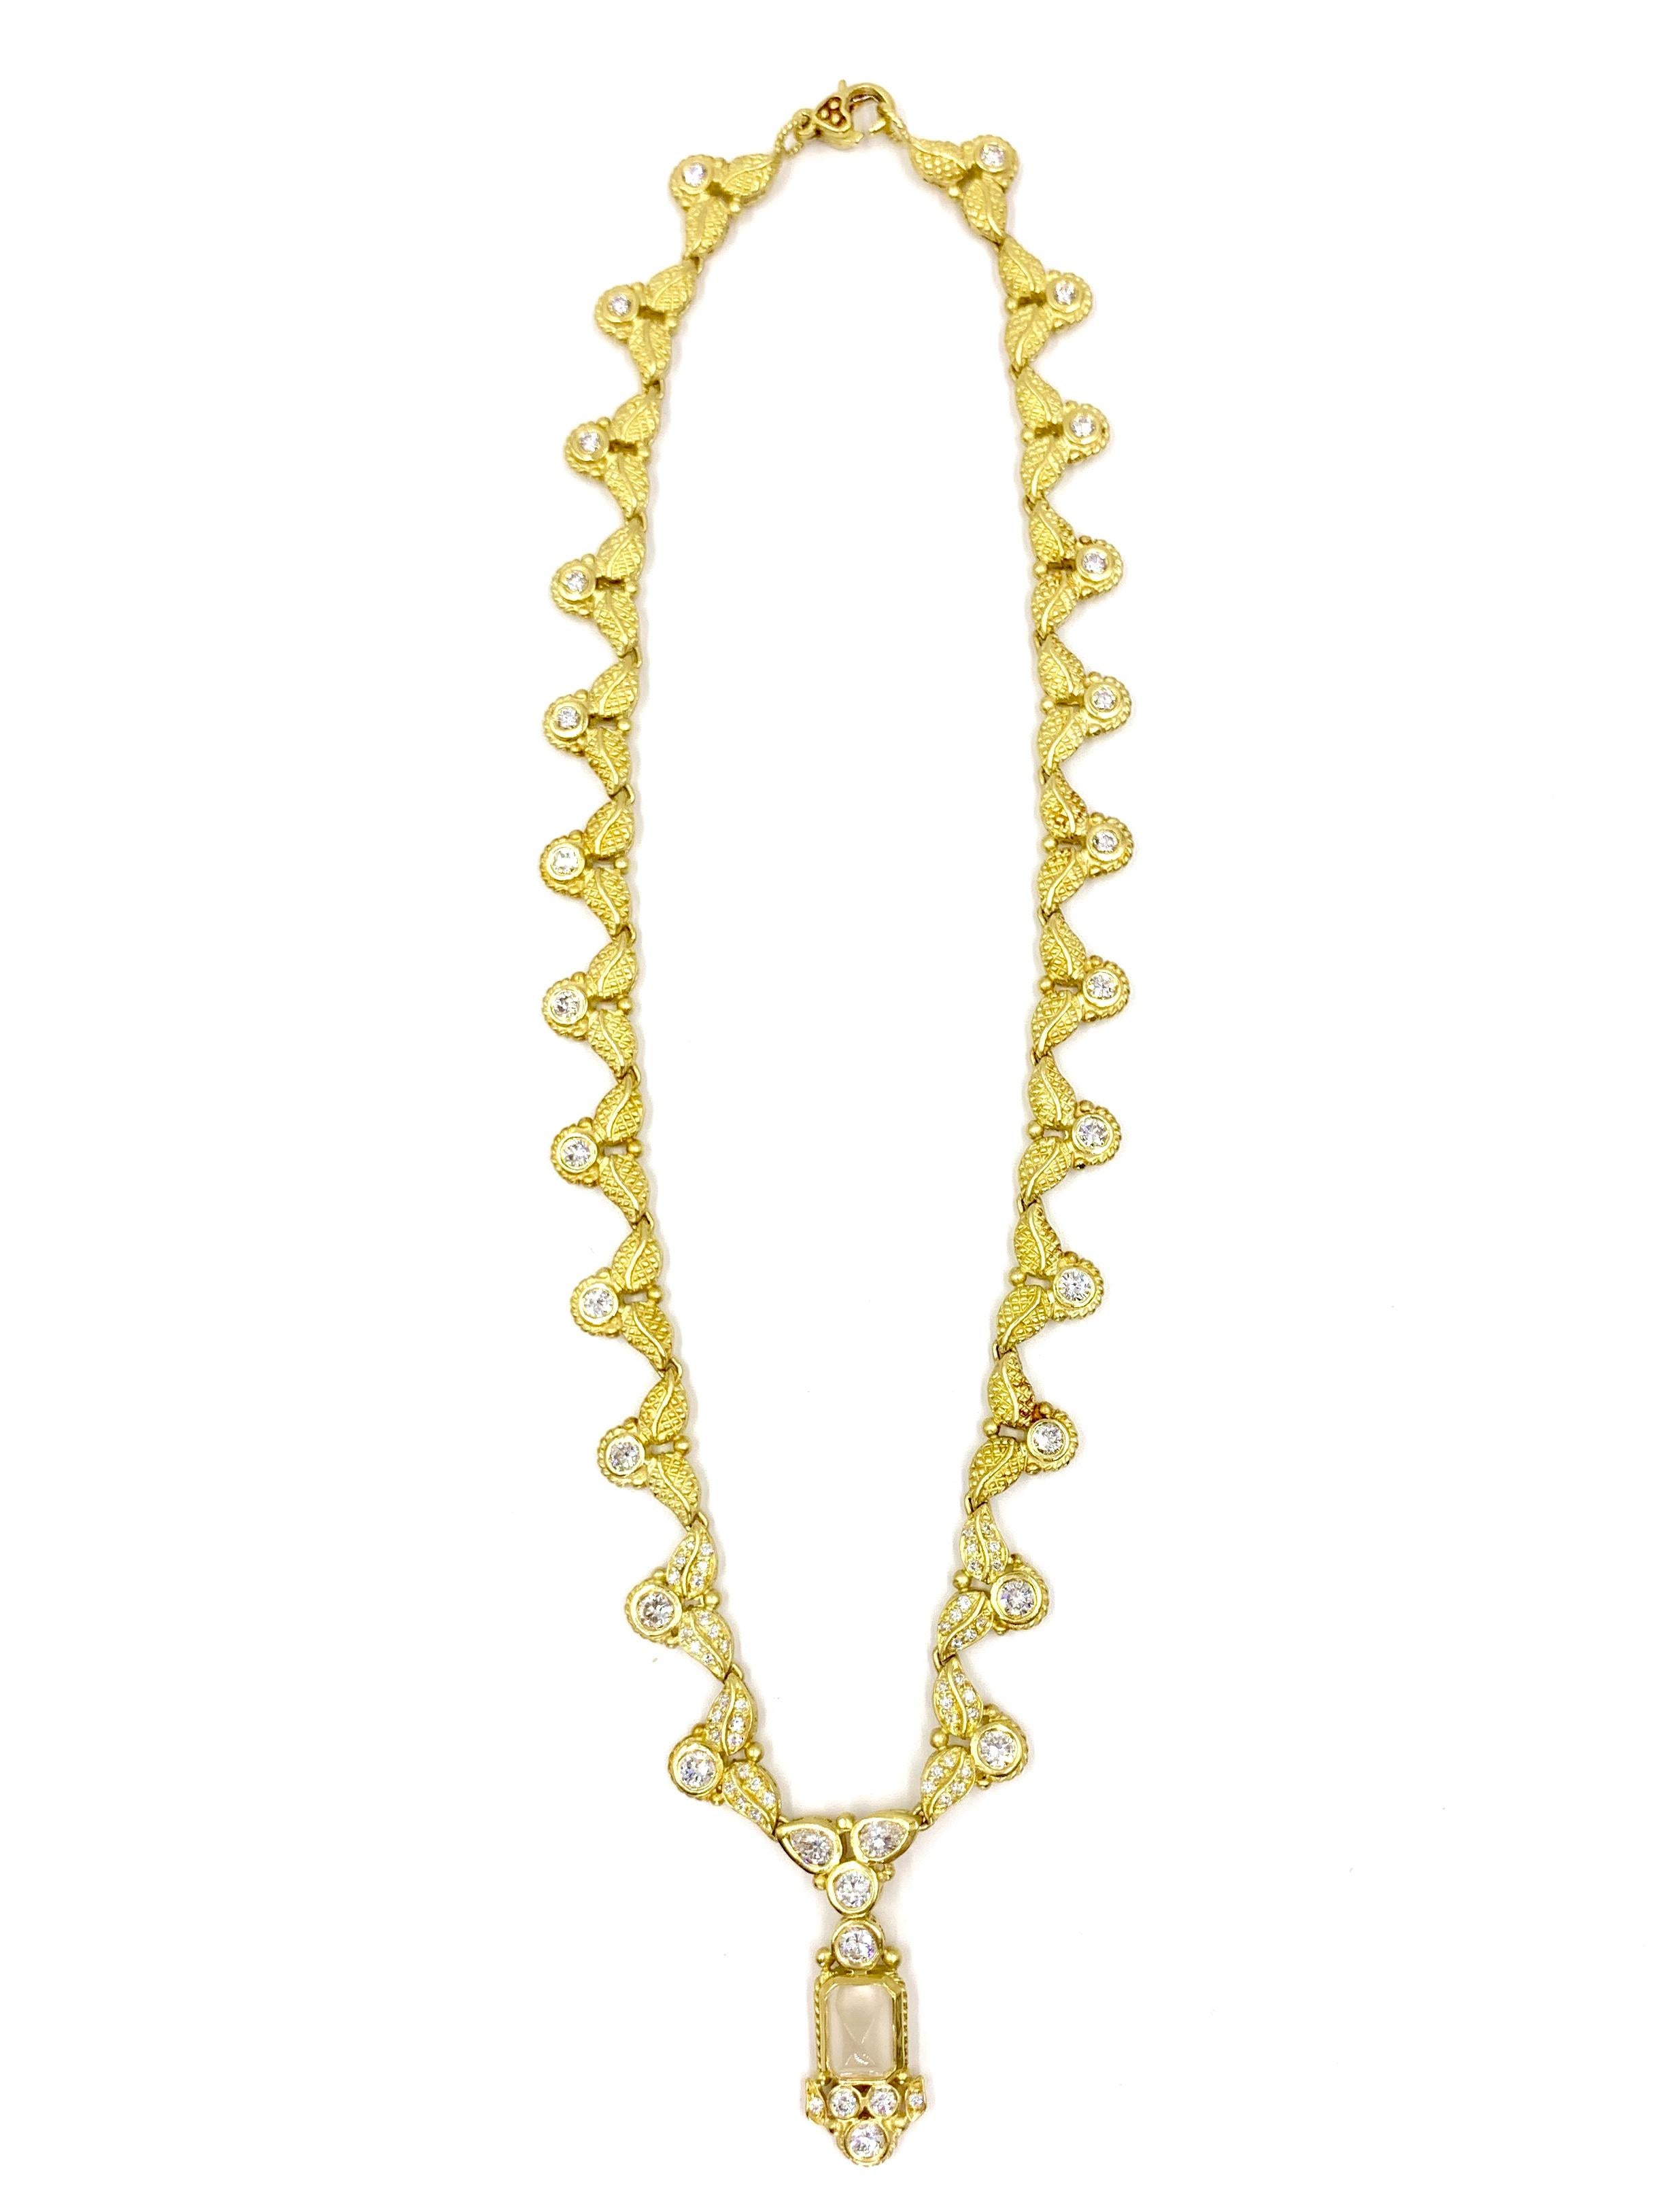 Eye catching Victorian inspired 18 karat yellow gold necklace by Judith Ripka. Necklace is versatile as center pendant is detachable. 3.53 carats of pear and round brilliant diamonds with high quality of approximately F color, VS clarity.